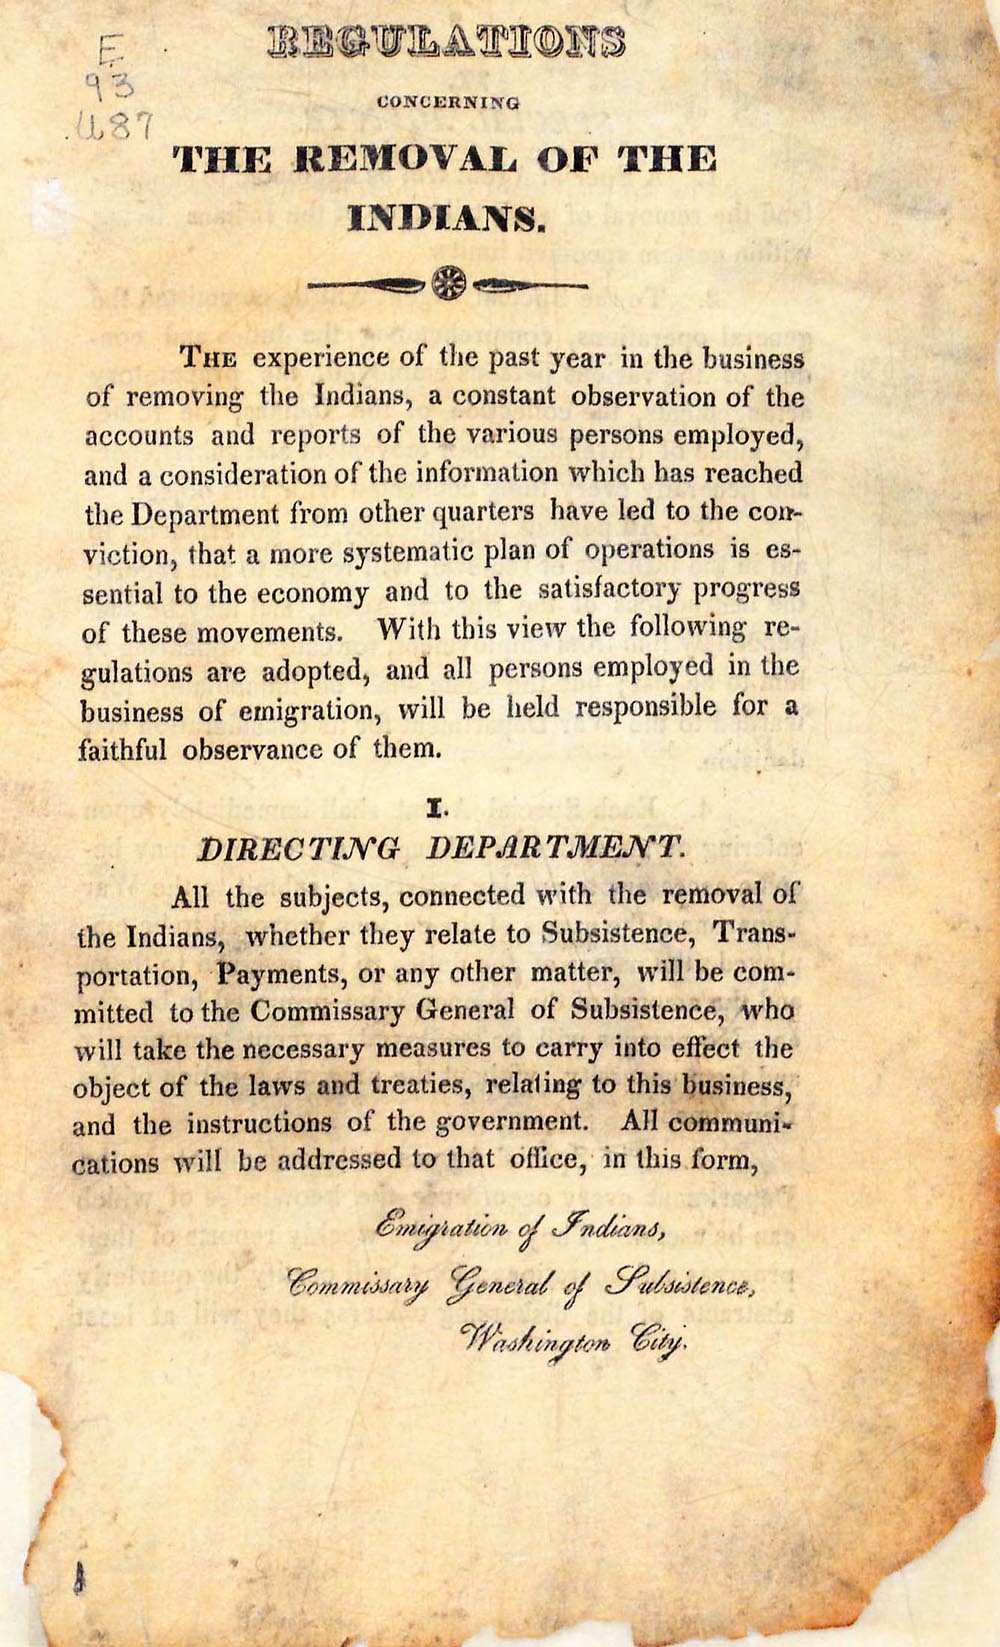 Regulations concerning the removal of the Indians, published by the United States War Department